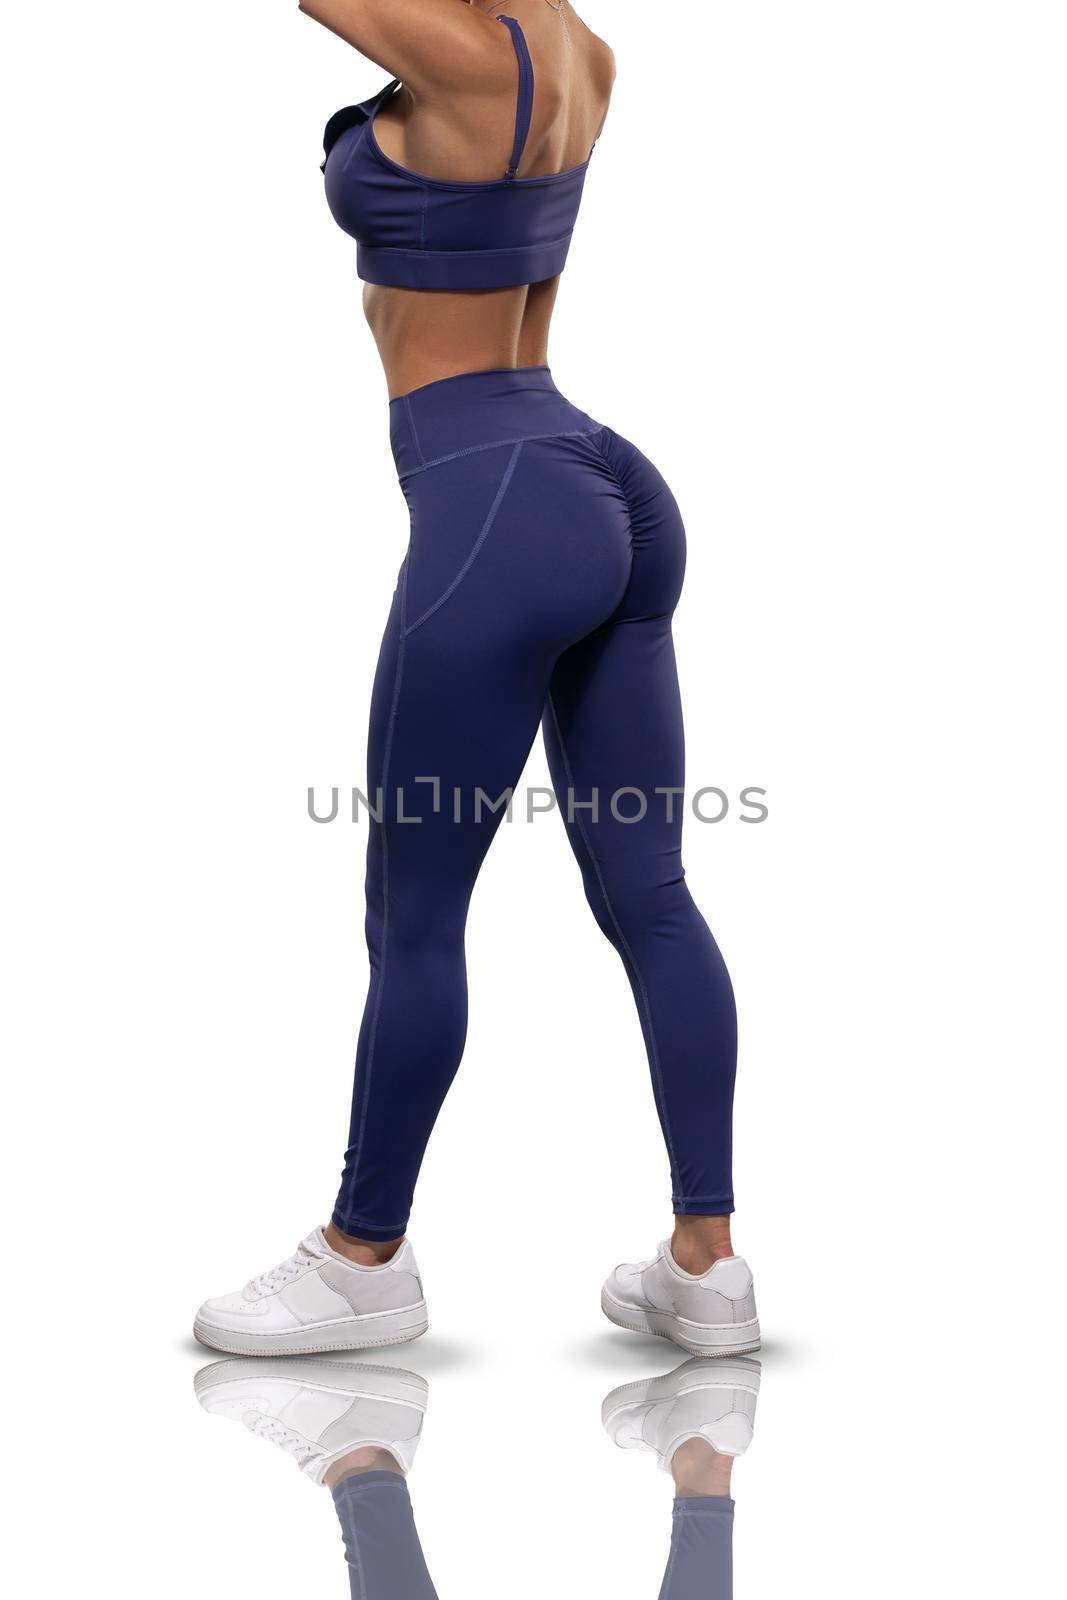 legs brunette girl in blue leggings and top stay back on a white background